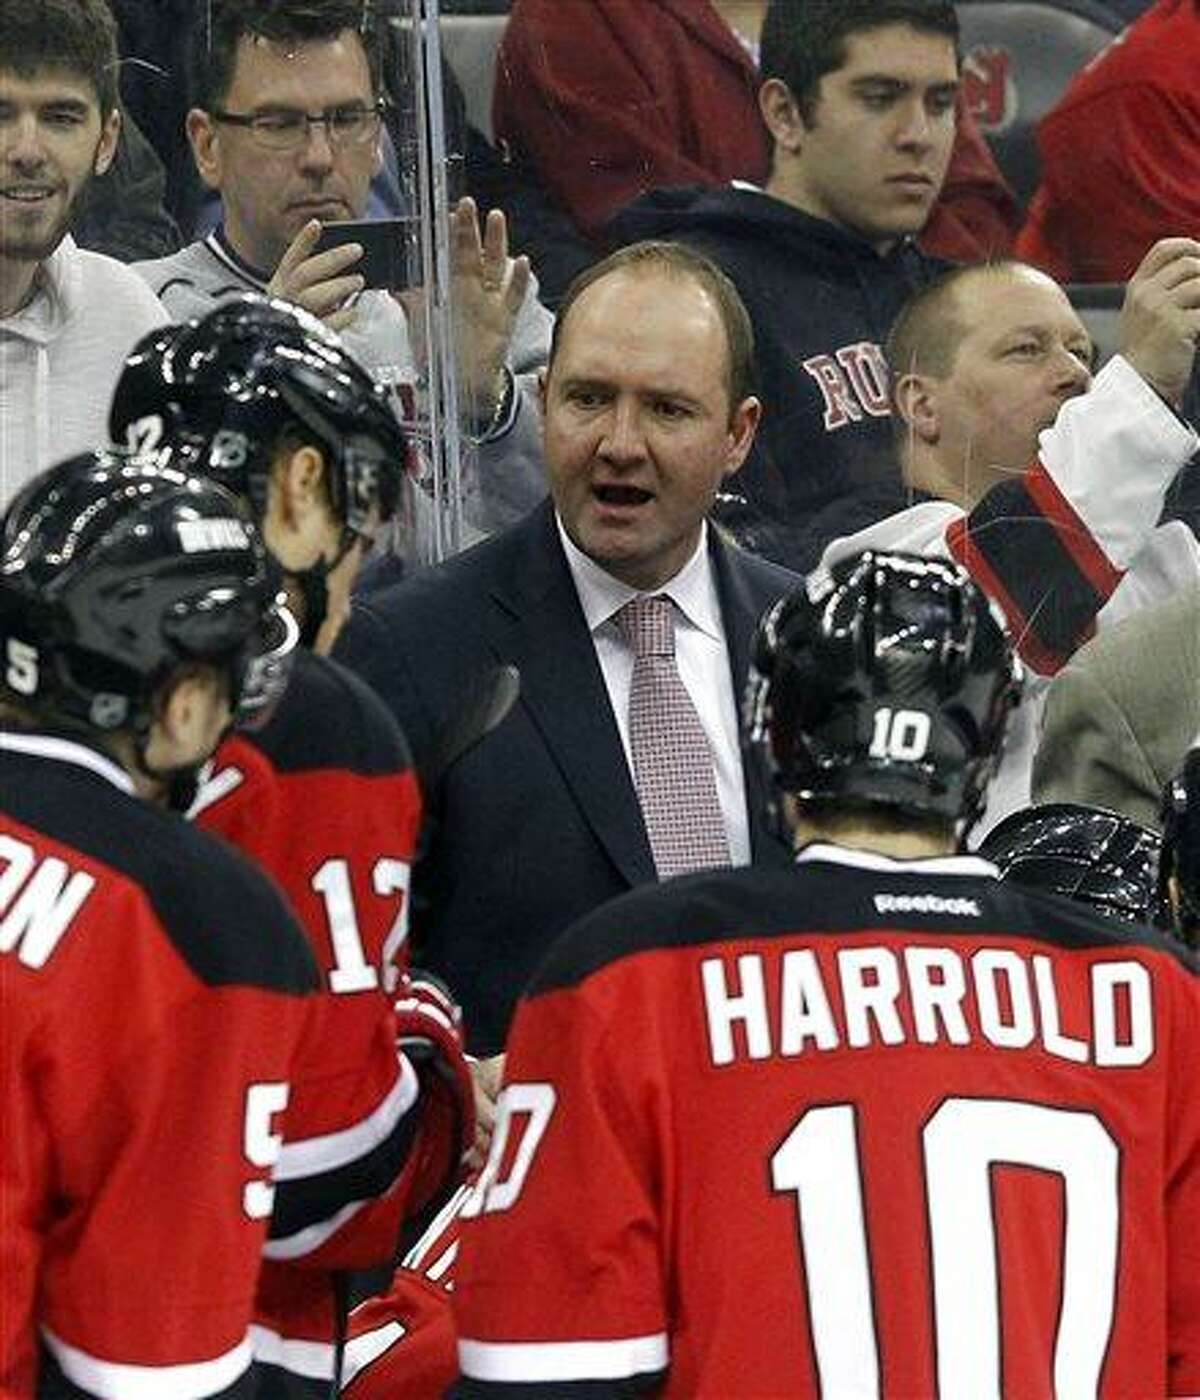 FILE - In this April 20, 2013 file photo, New Jersey Devils head coach Peter DeBoer talks to his team during the first period of an NHL hockey game against the Florida Panthers in Newark, N.J. While caught off guard by star forward Ilya Kovalchuk's decision to retire from the NHL and return home to Russia, New Jersey Devils coach DeBoer said his team's job next season is to play well enough to make up for the loss of one of the NHL's top players. (AP Photo/Jason DeCrow, File)